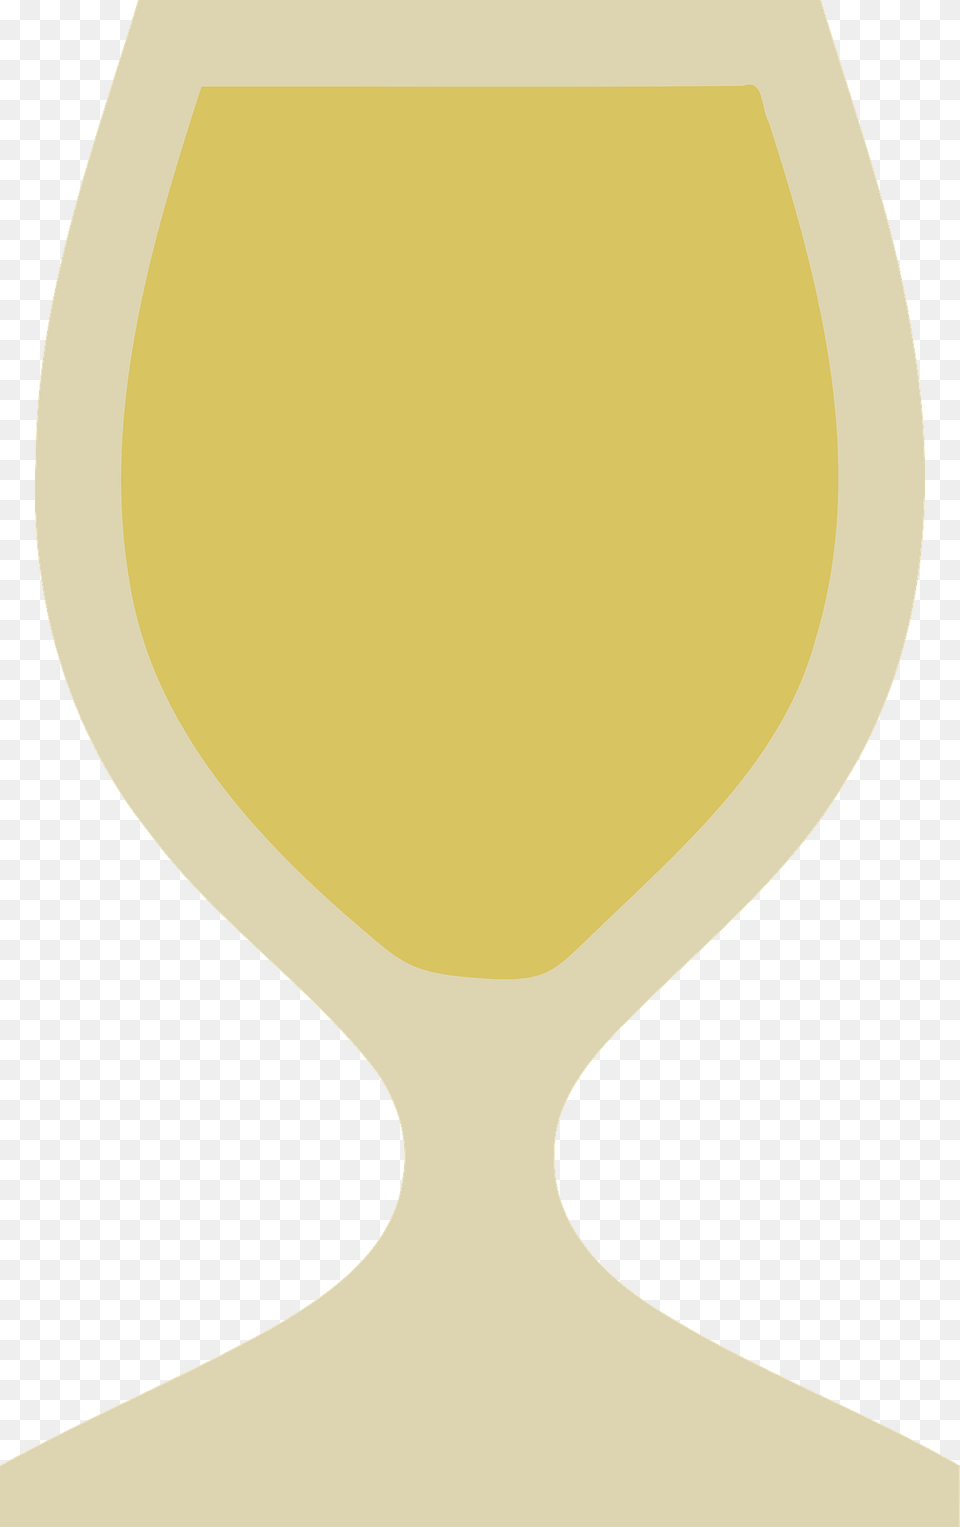 Glass Full Of White Wine Clipart, Hourglass Png